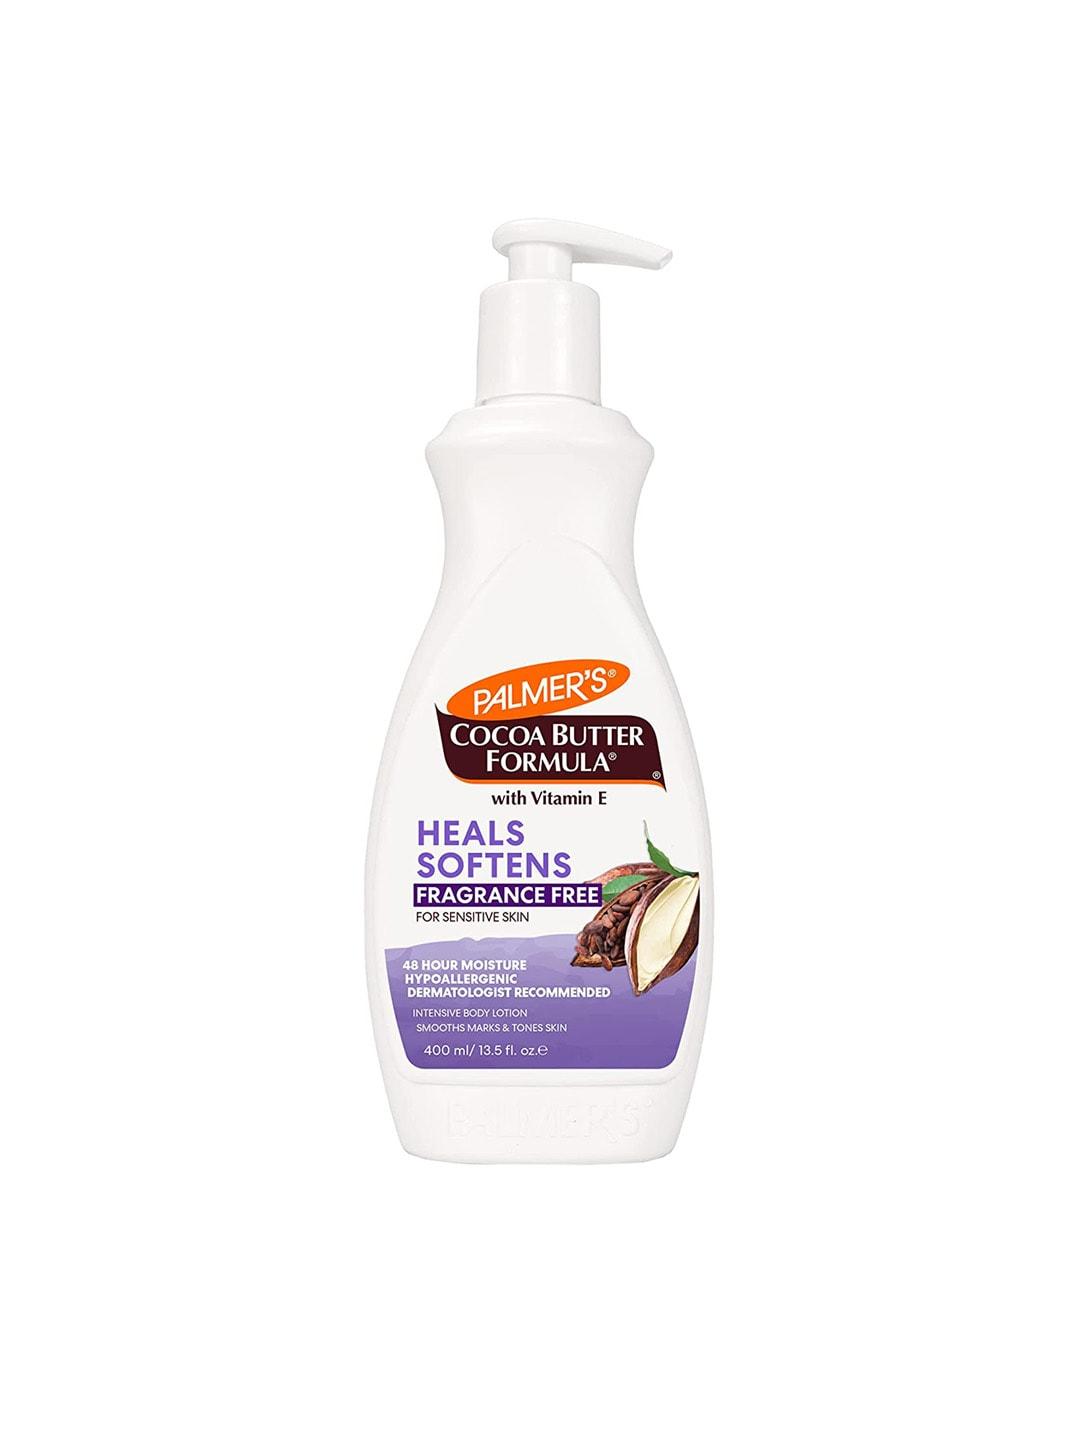 Palmer's Heals Softens Cocoa Butter Fragrance-Free Body Lotion For Sensitive Skin - 400ml